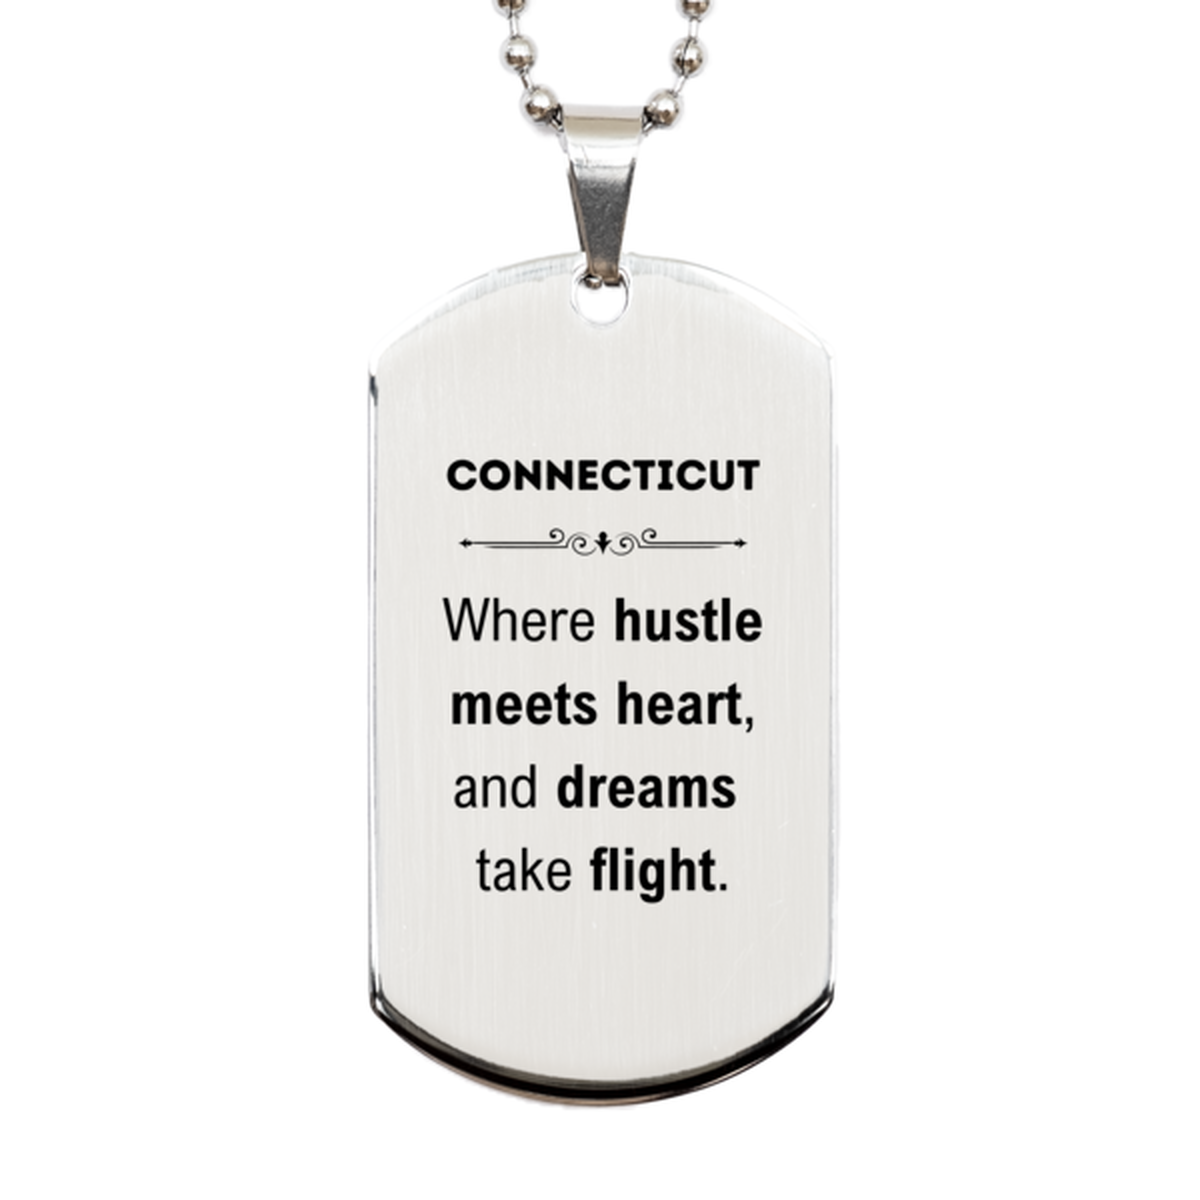 Connecticut: Where hustle meets heart, and dreams take flight, Connecticut Gifts, Proud Connecticut Christmas Birthday Connecticut Silver Dog Tag, Connecticut State People, Men, Women, Friends